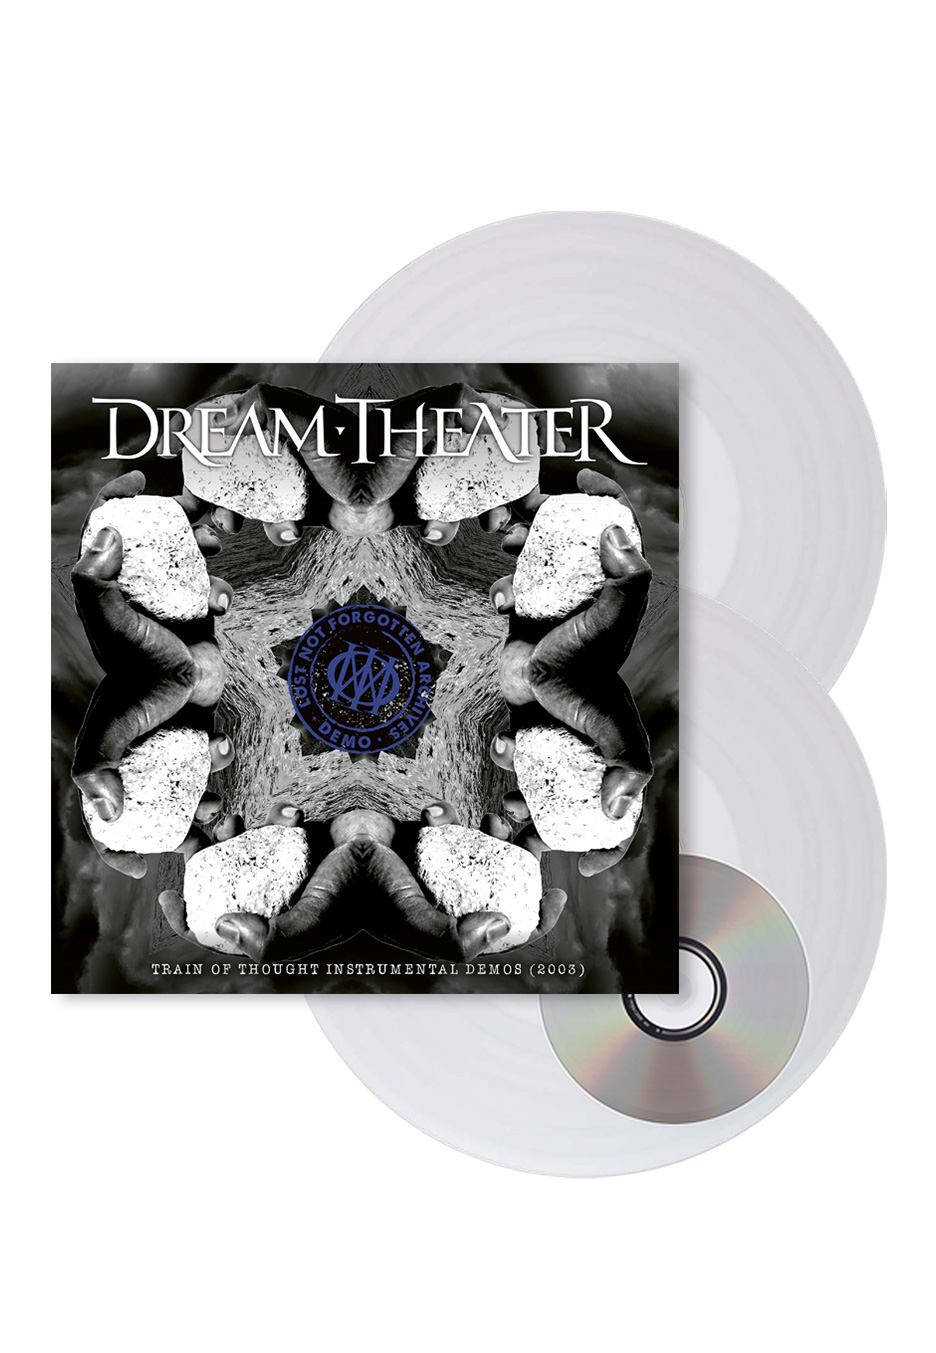 Dream Theater - Lost not Forgotten Archives: Train of Thought Instrumental Demos. Ltd Ed. White 2LP/CD